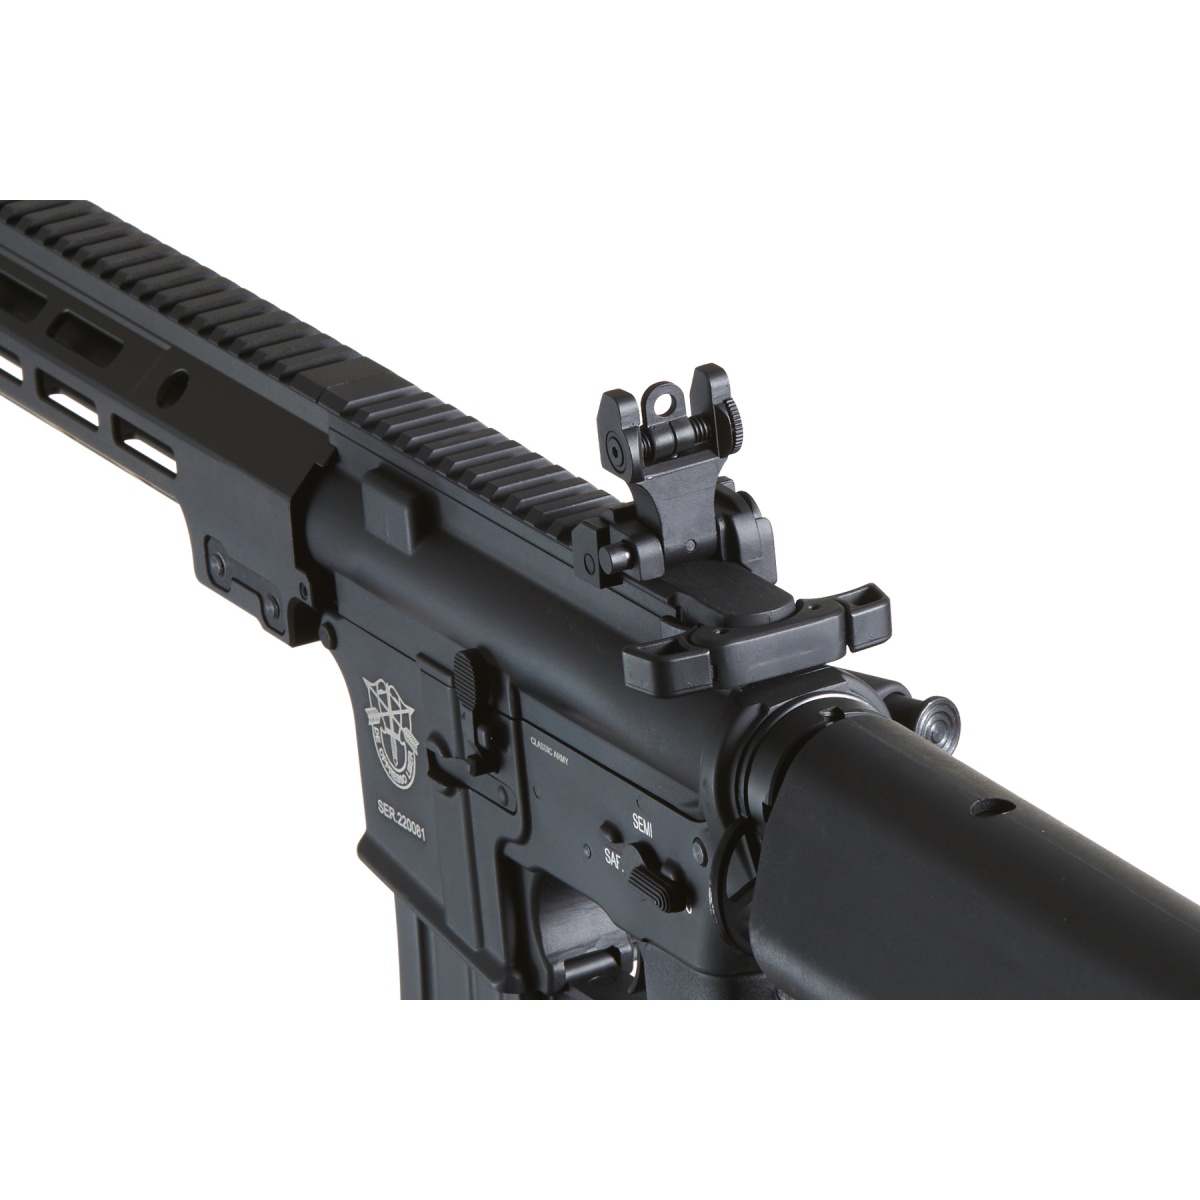 Black Ops Viper Airsoft Rifle - Black Ops USA